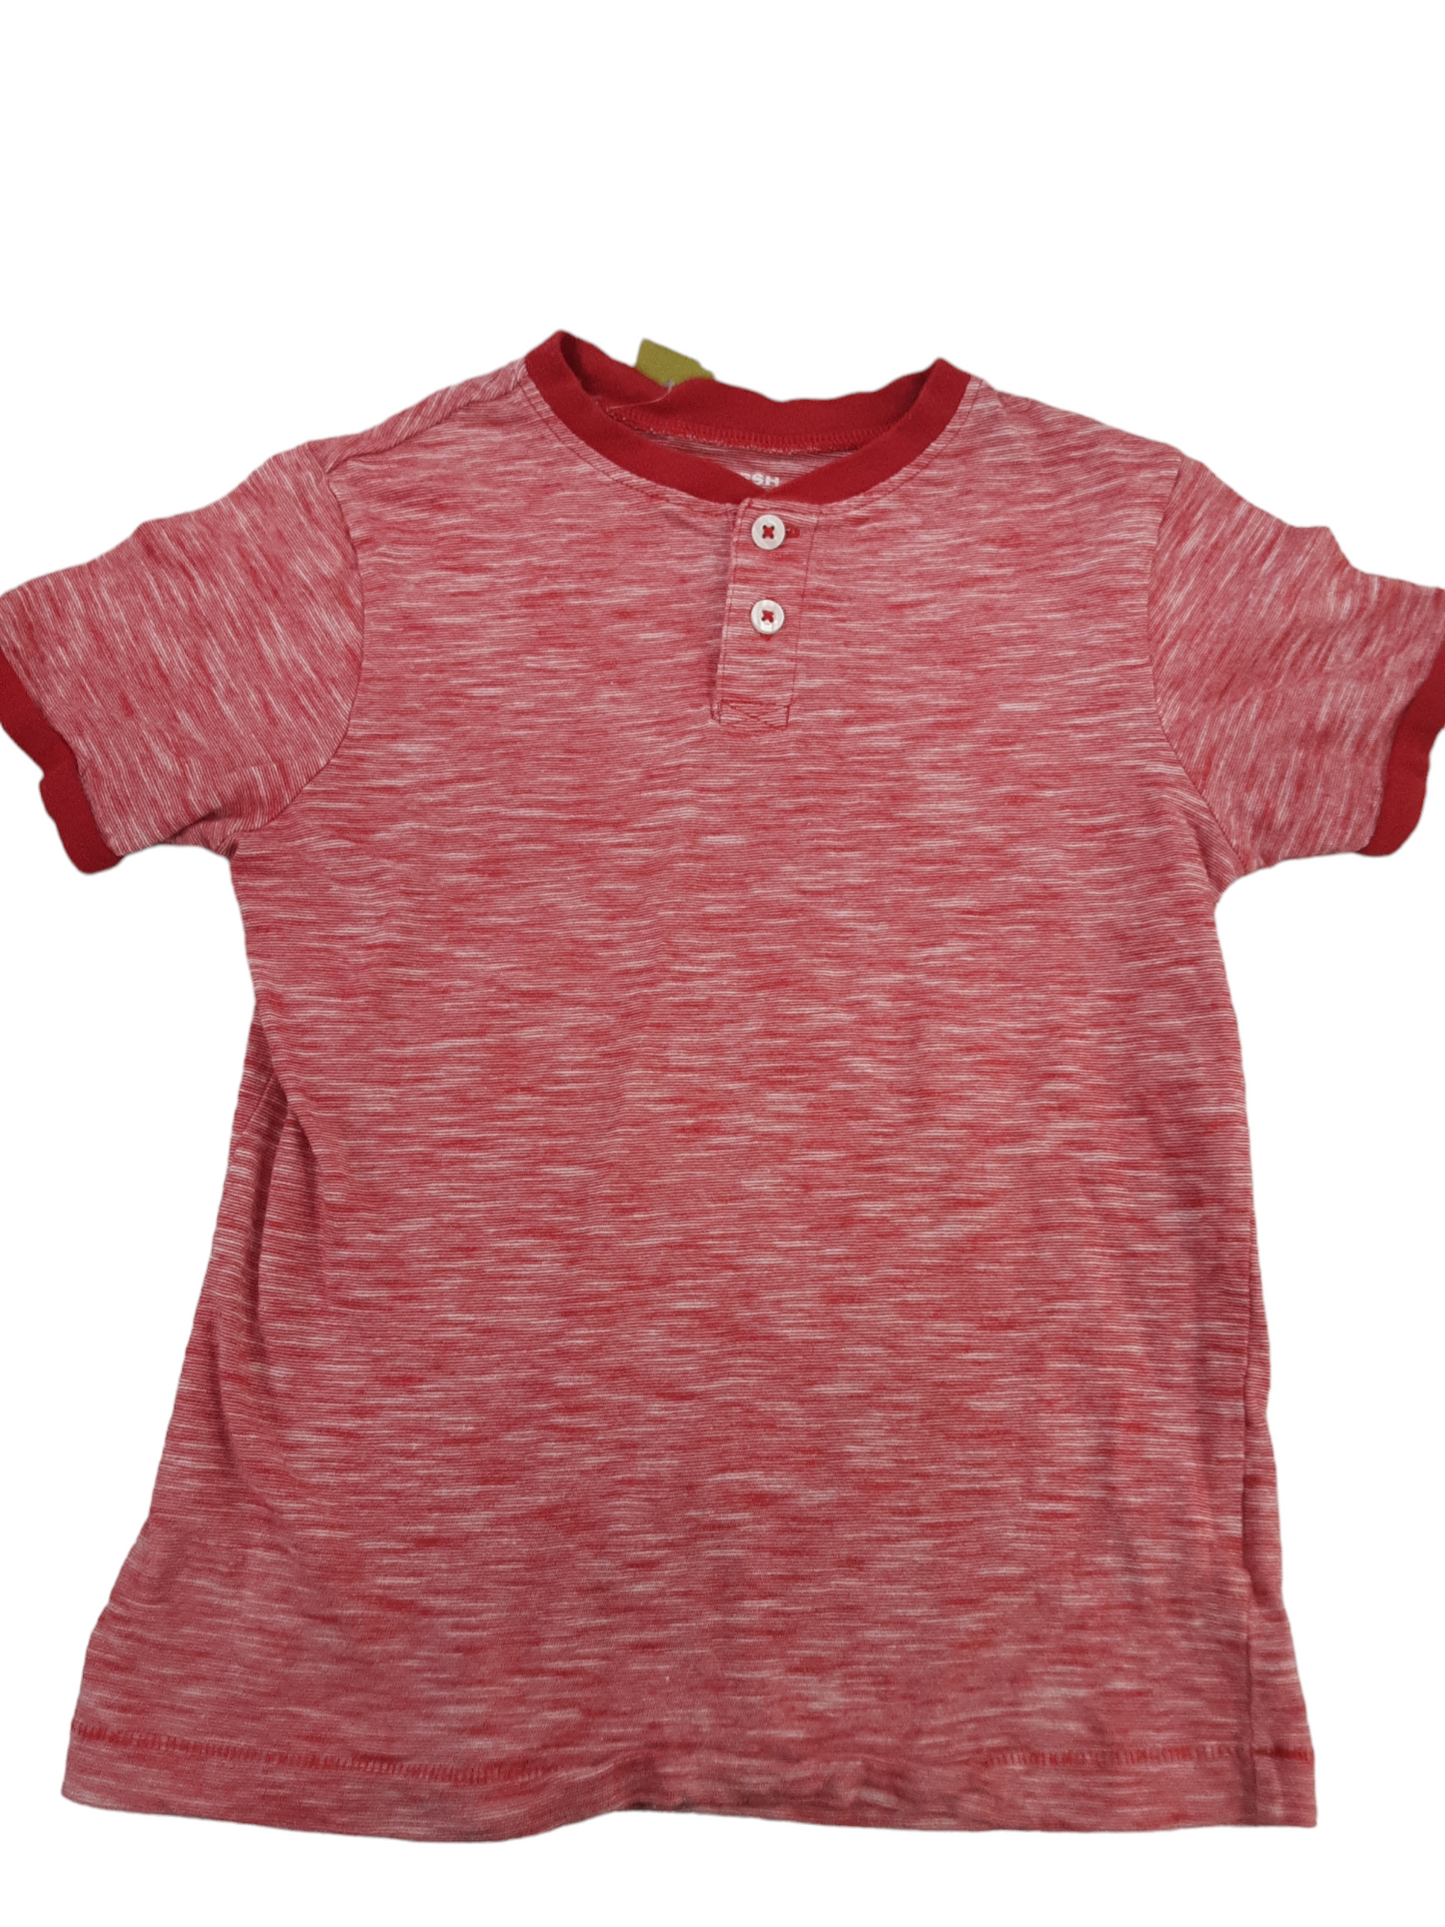 Red & white Heather top size 6